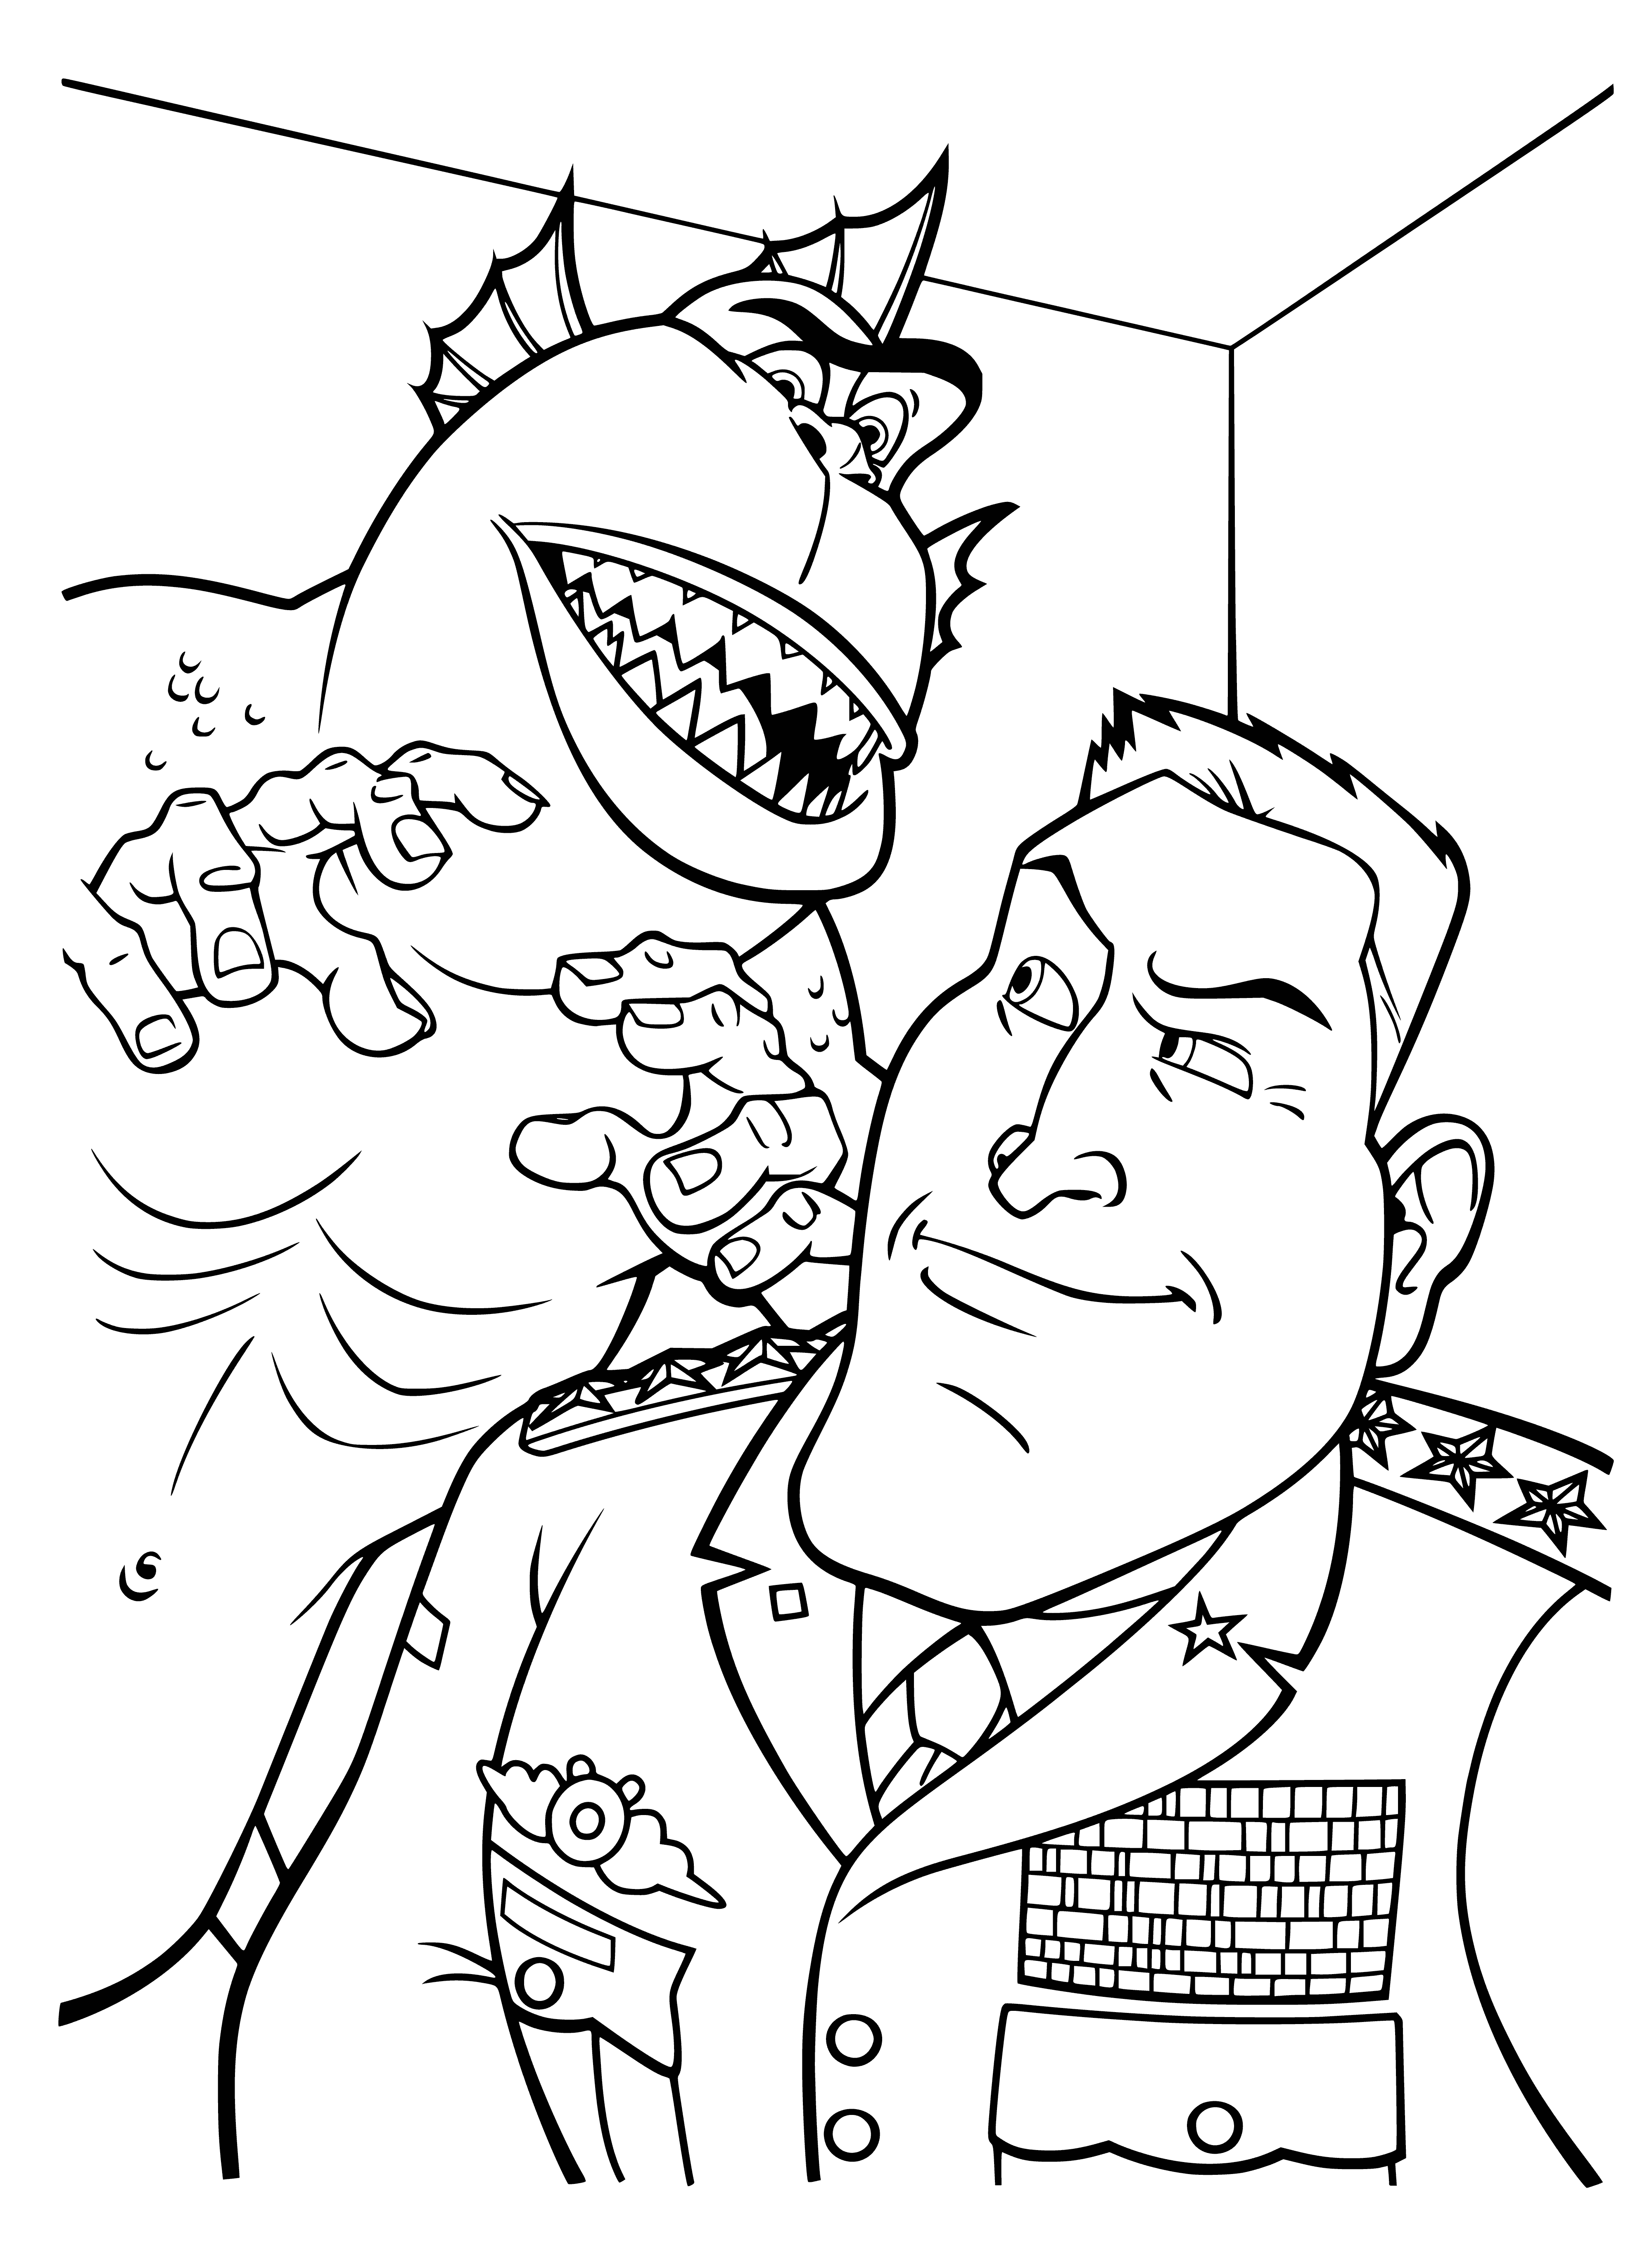 Missing Link and Voyaker coloring page